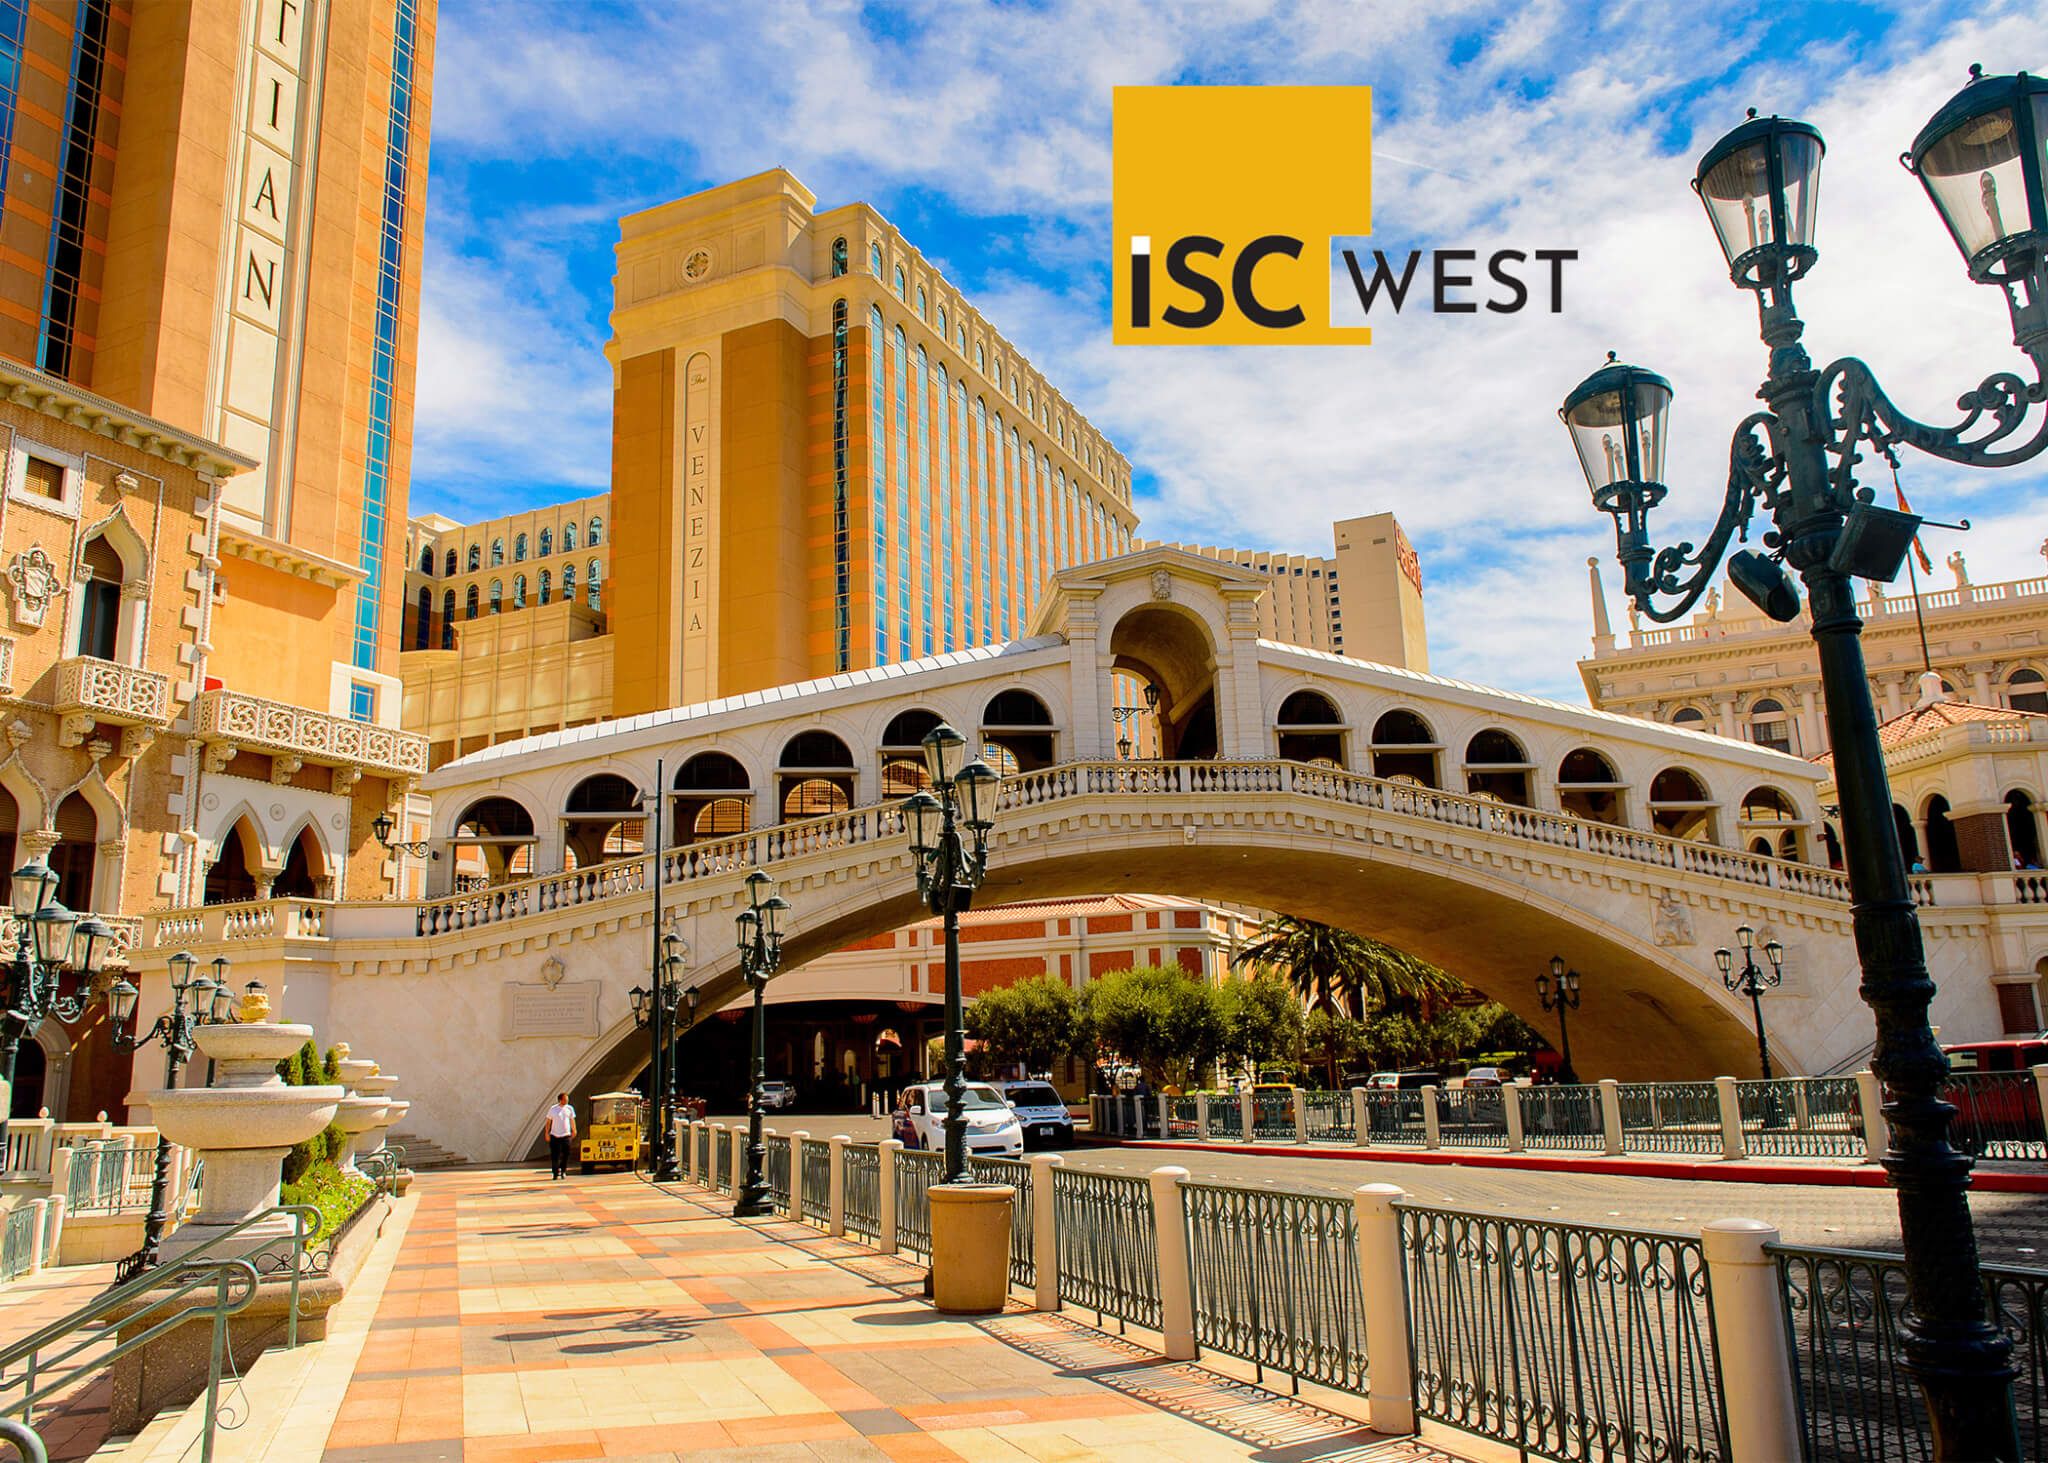 Smarter Security takes ISC West – The Recap